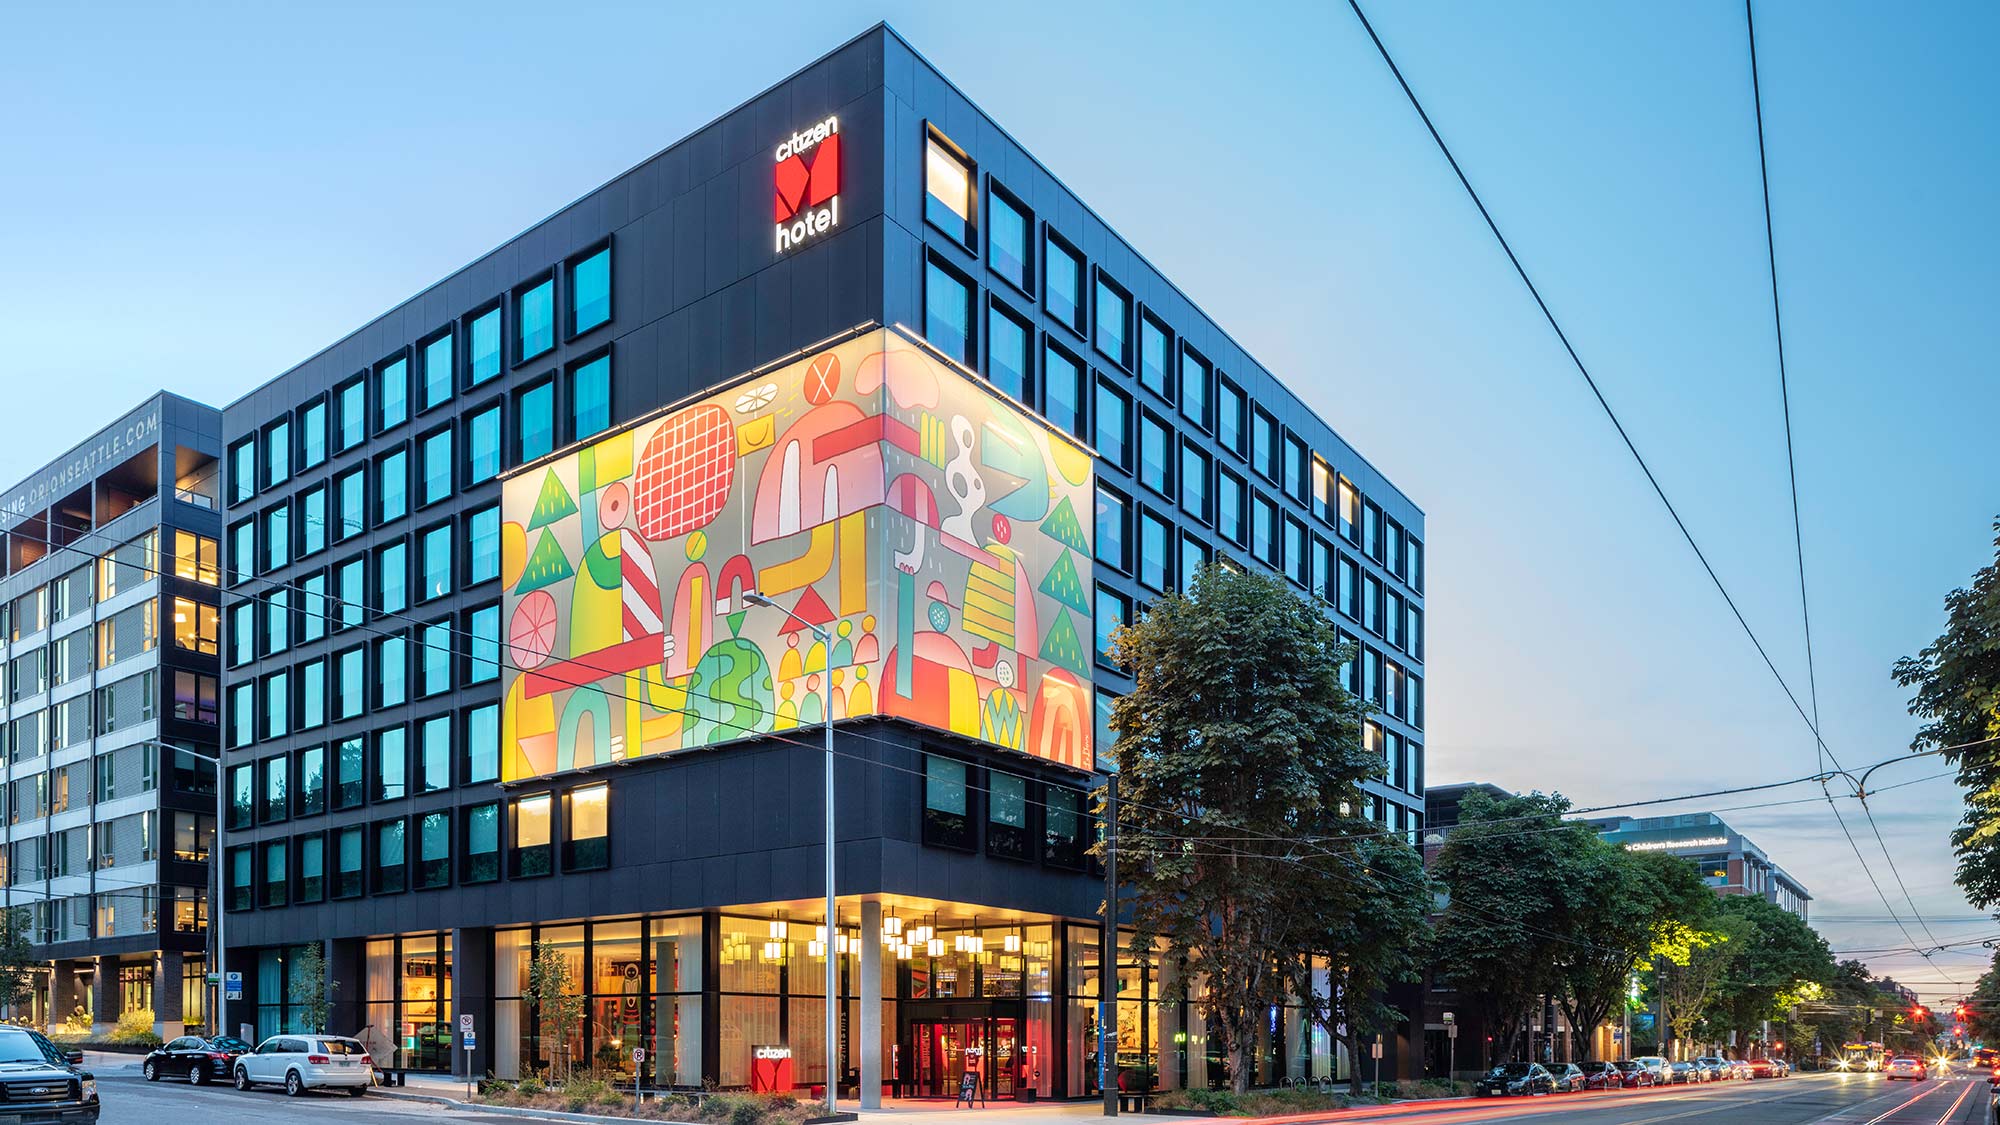 Exterior image of the citizenM hotel in Seattle